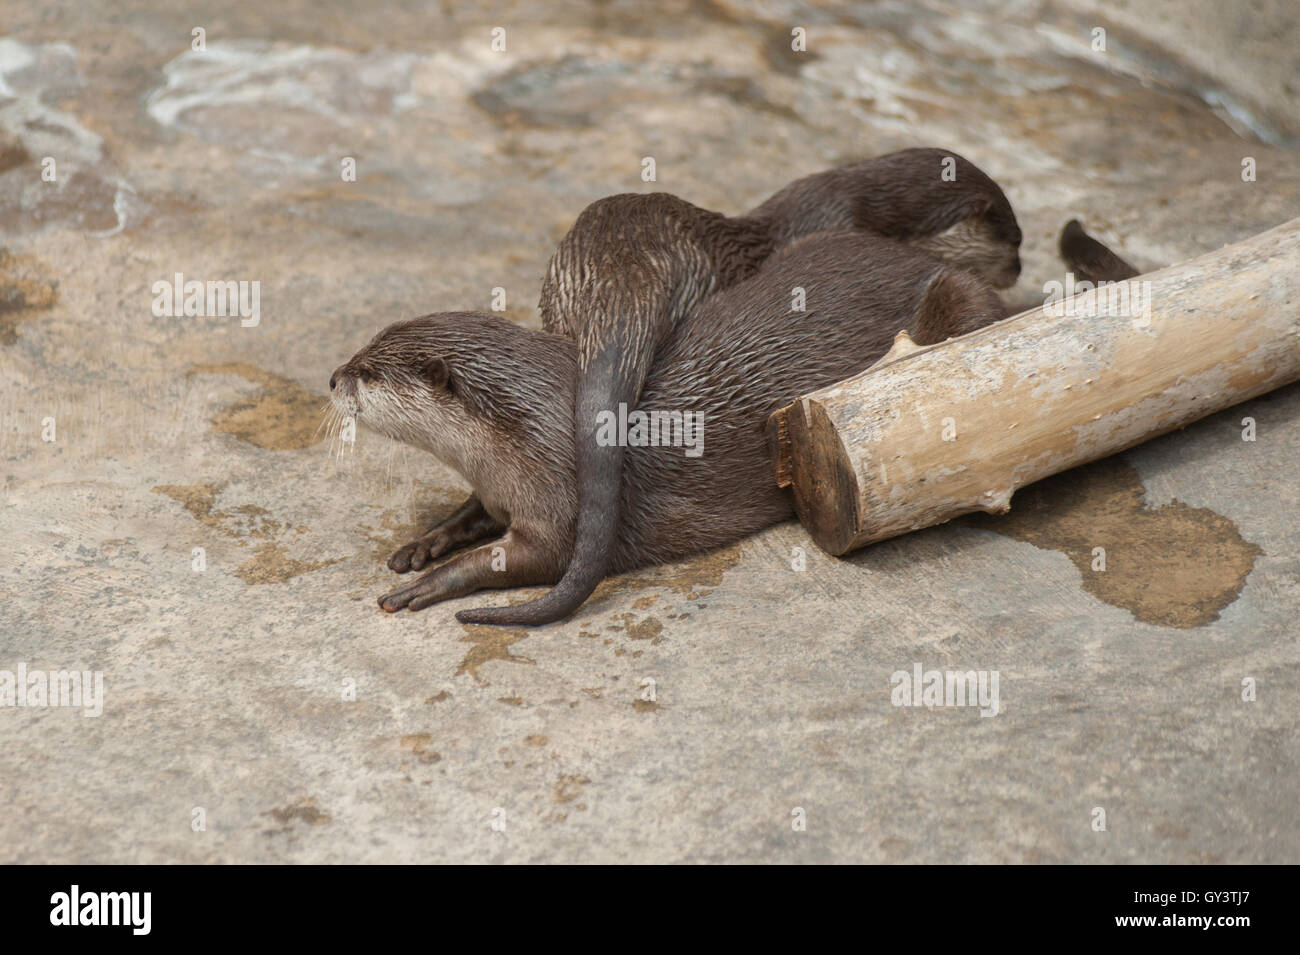 Asian Small Claw Otters snuggling together for warmth. Stock Photo